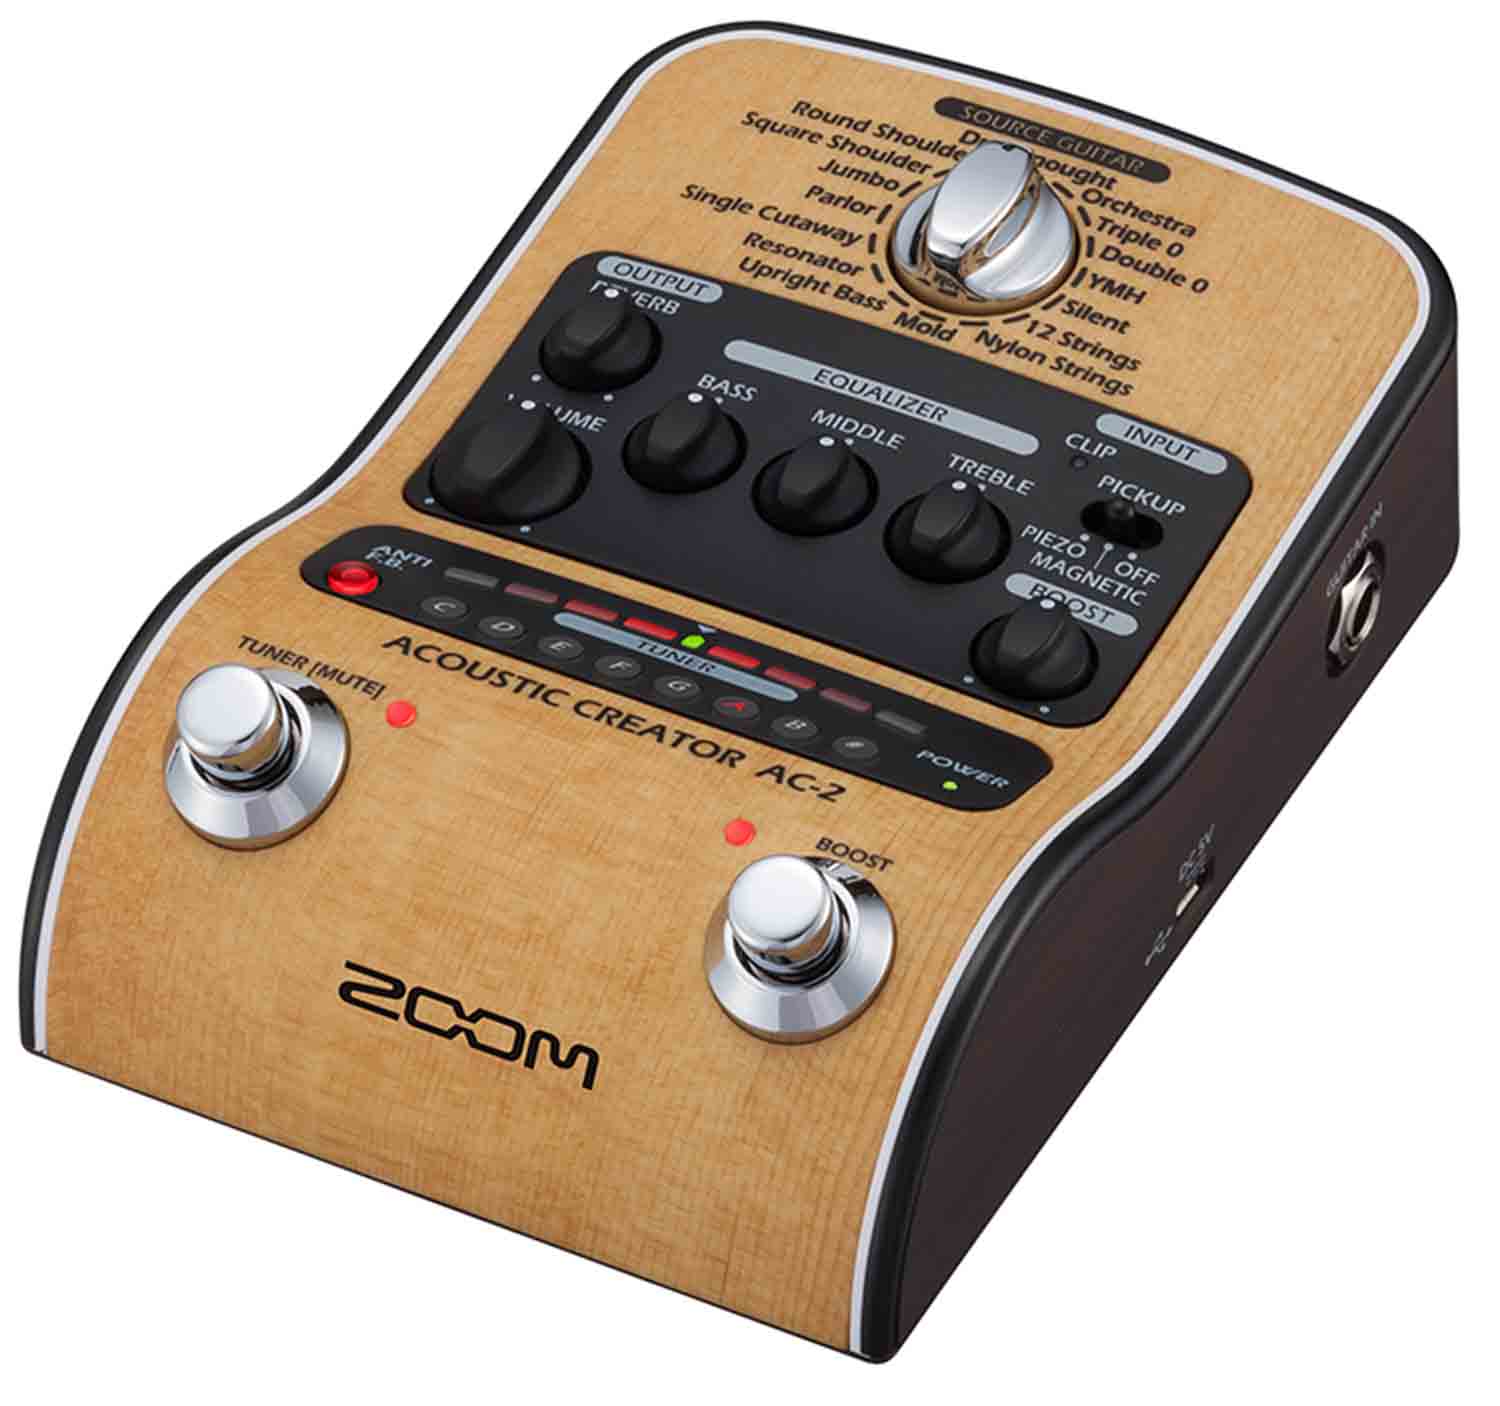 B-Stock: Zoom AC-2 Acoustic Creator Direct Box with 16 Source Guitars - Hollywood DJ